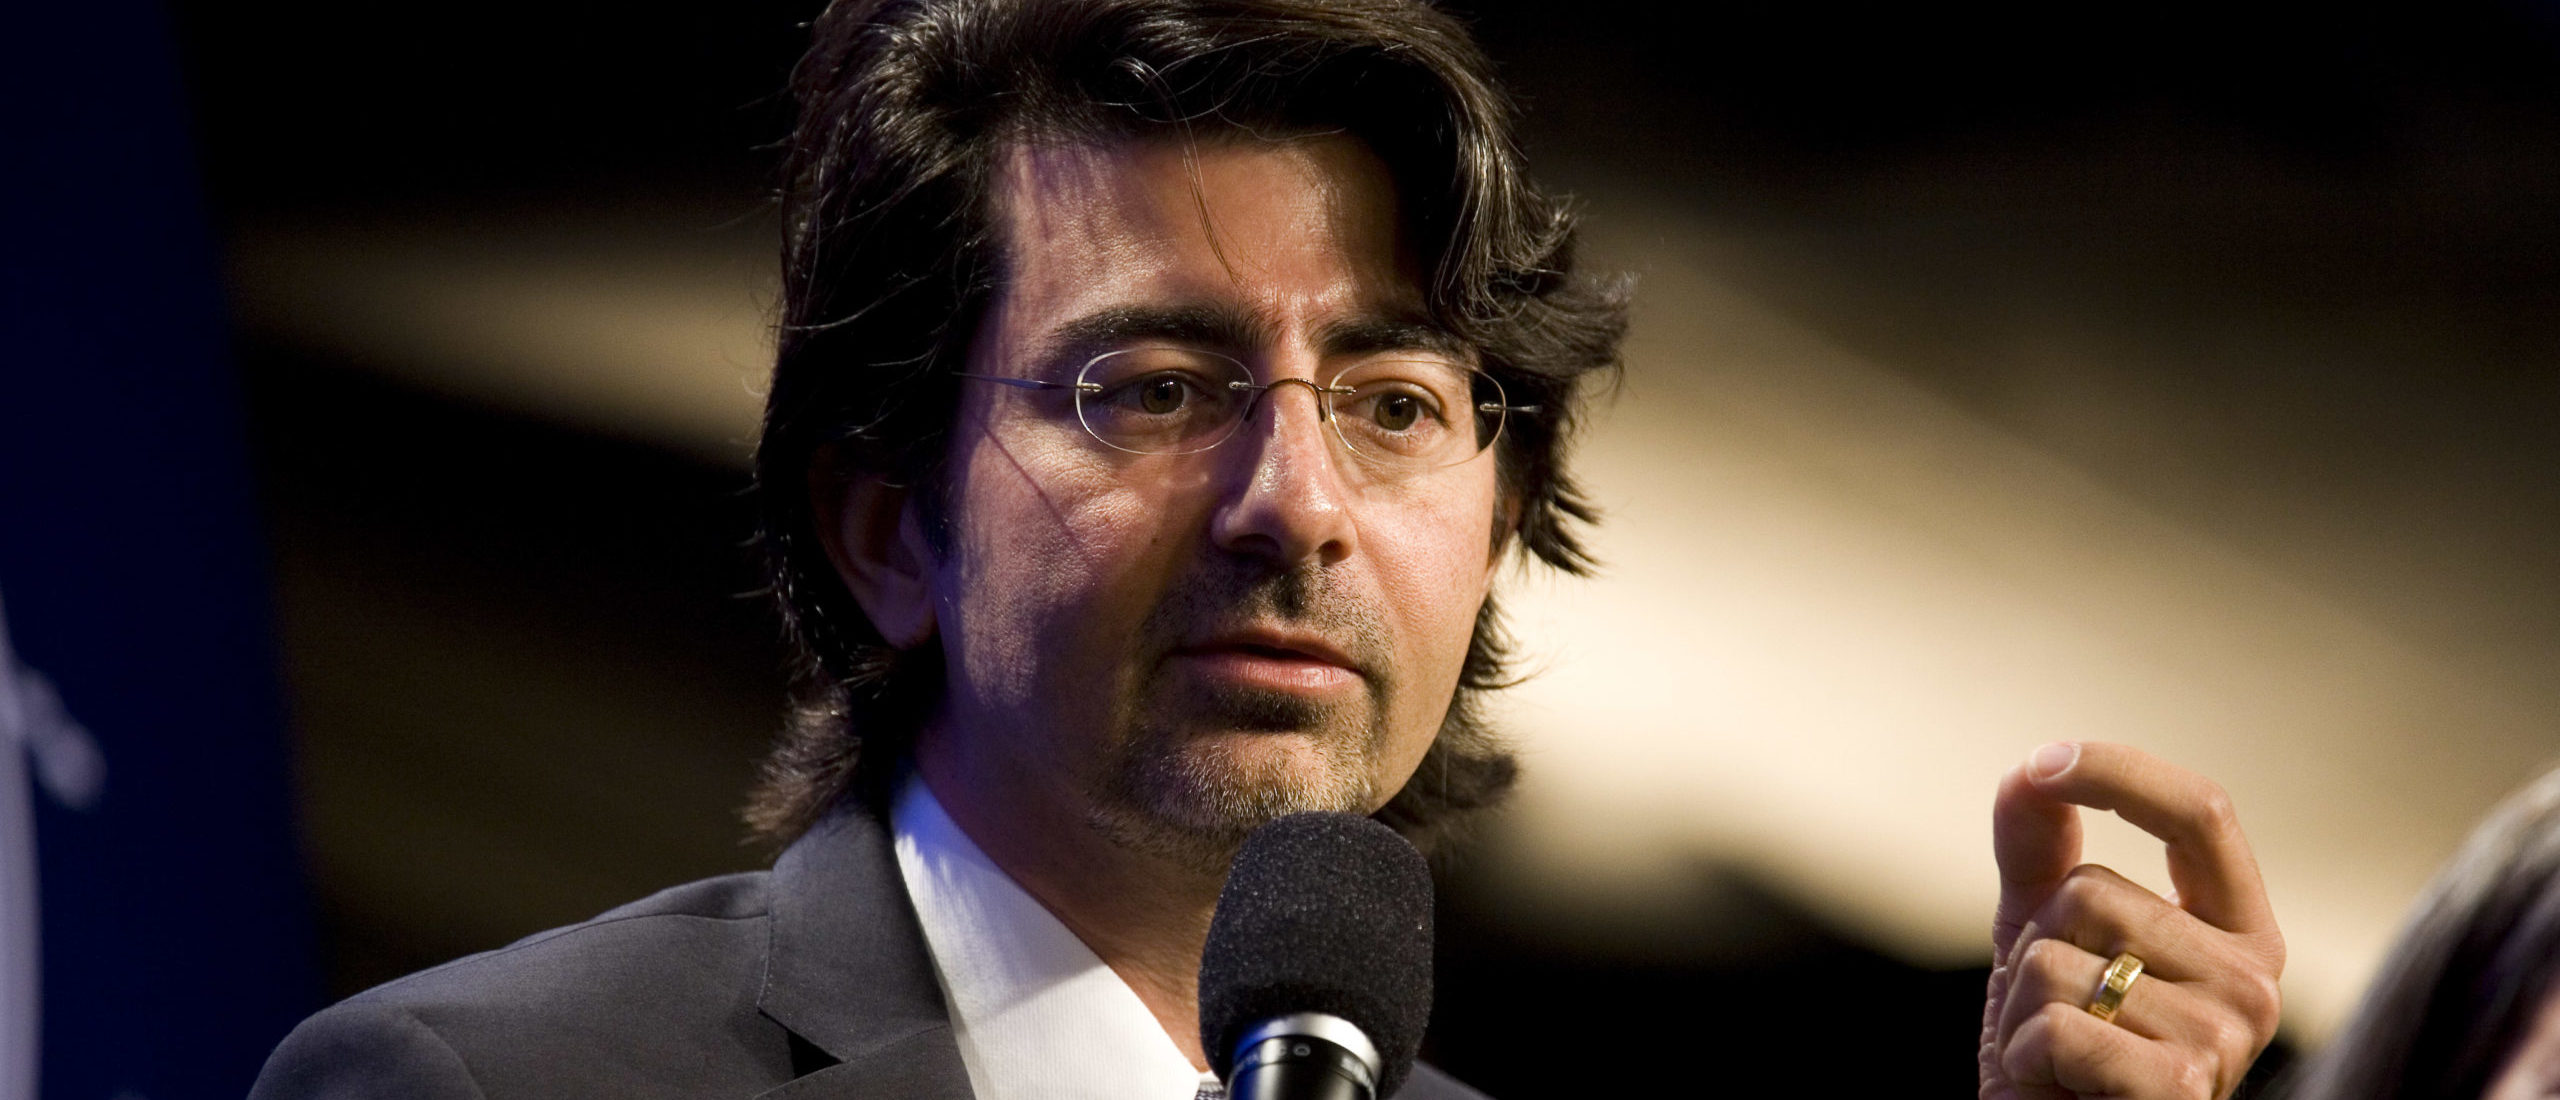 eBay founder Pierre Omidyar speaks during the panel session Democracy and Voice: Technology For Citizen Empowerment and Human Rights during the annual Clinton Global Initiative (CGI) on September 23, 2010 in New York City. (Photo by Brian Harkin/Getty Images)